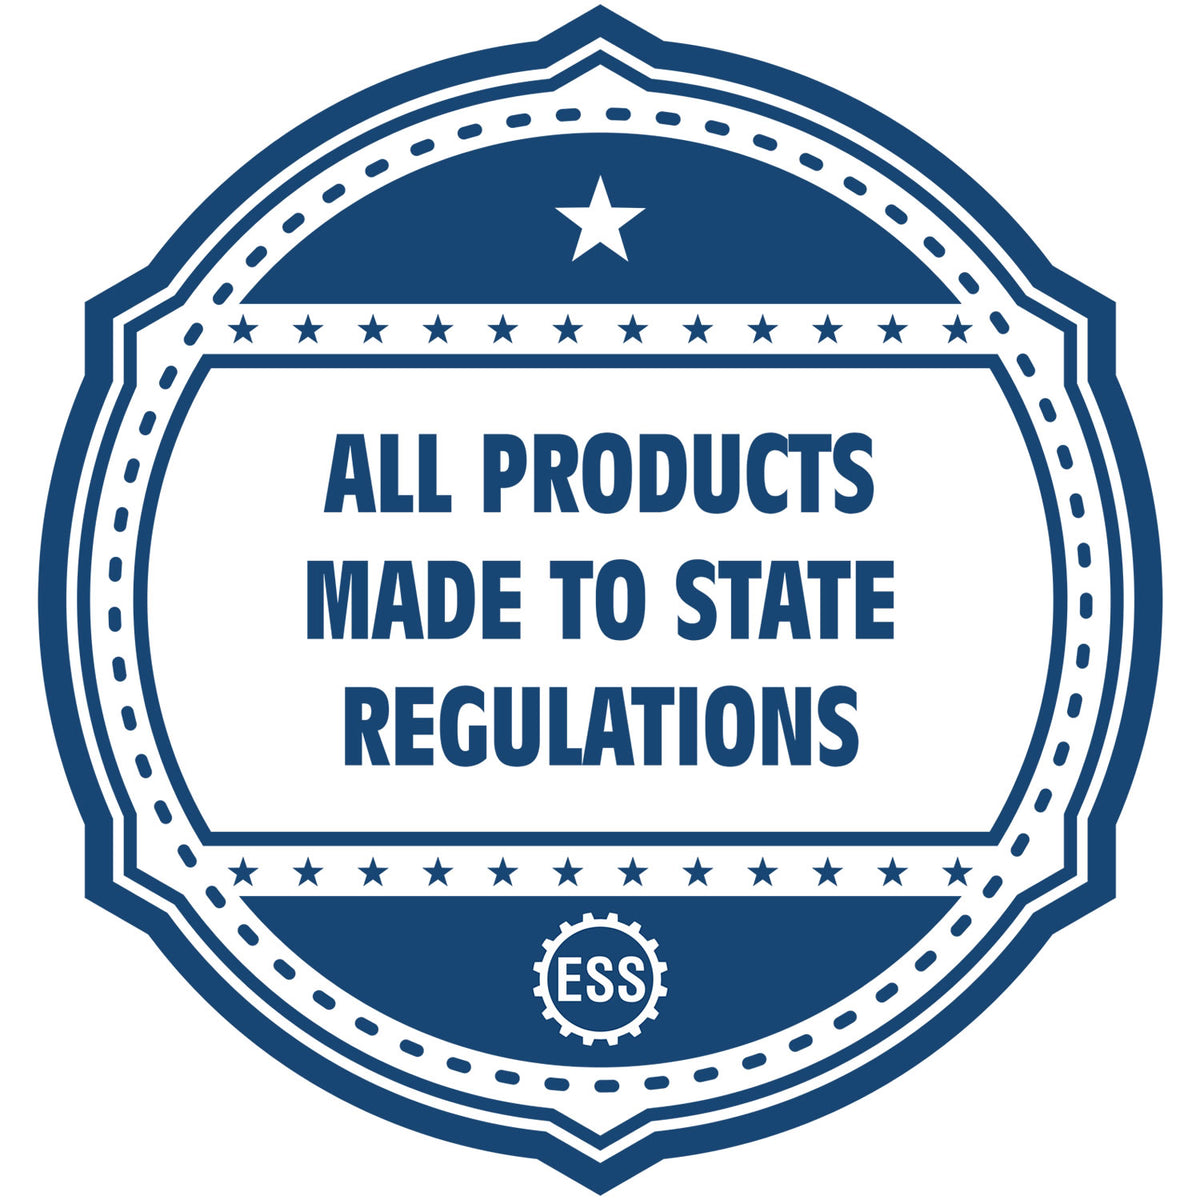 An icon or badge element for the Slim Pre-Inked Minnesota Landscape Architect Seal Stamp showing that this product is made in compliance with state regulations.